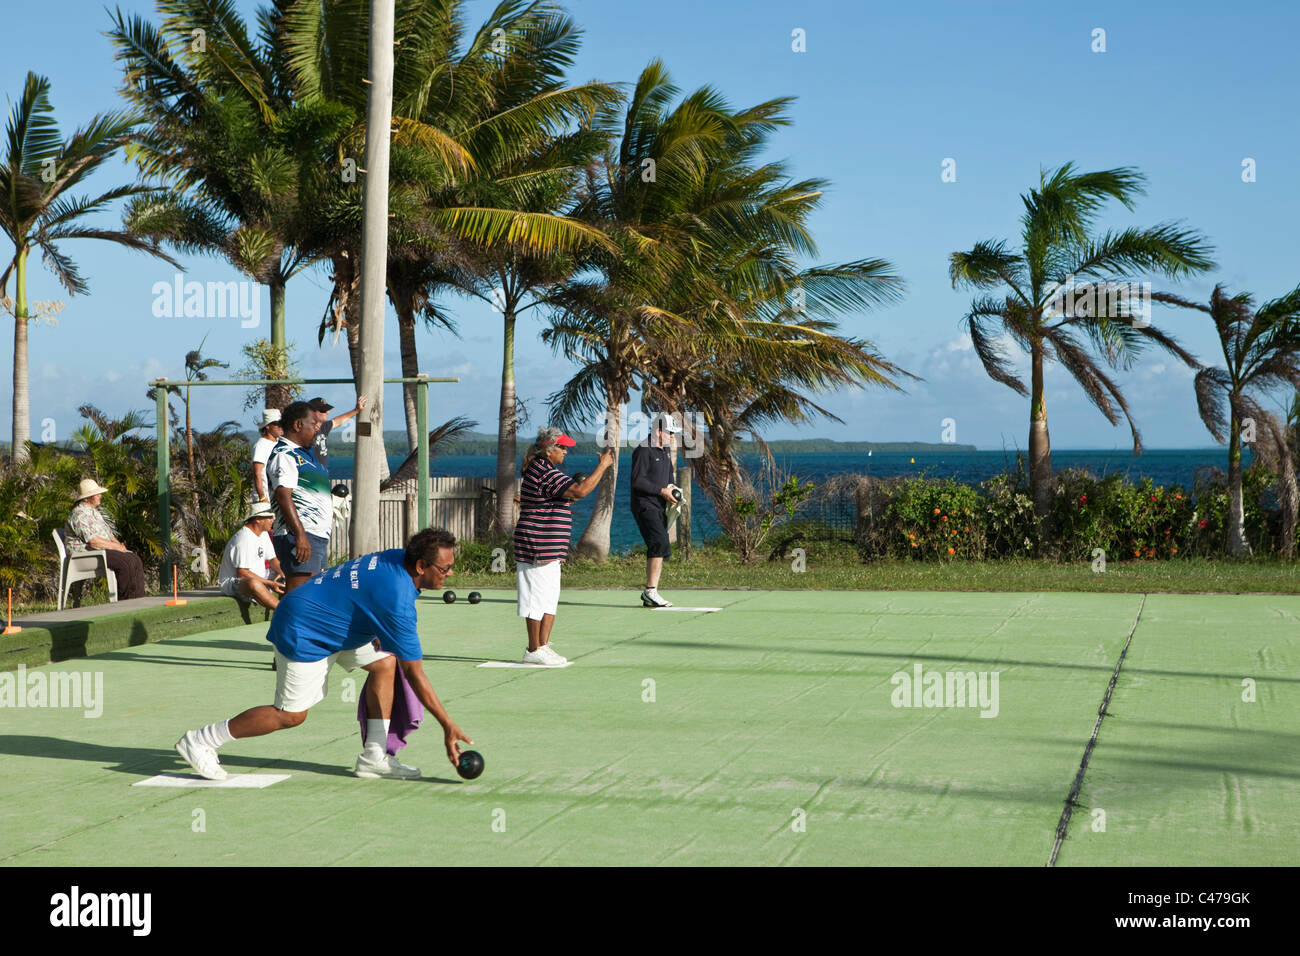 Game of lawn bowls at the Thursday Island Bowls club. Thursday Island, Torres Strait Islands, Queensland, Australia Stock Photo